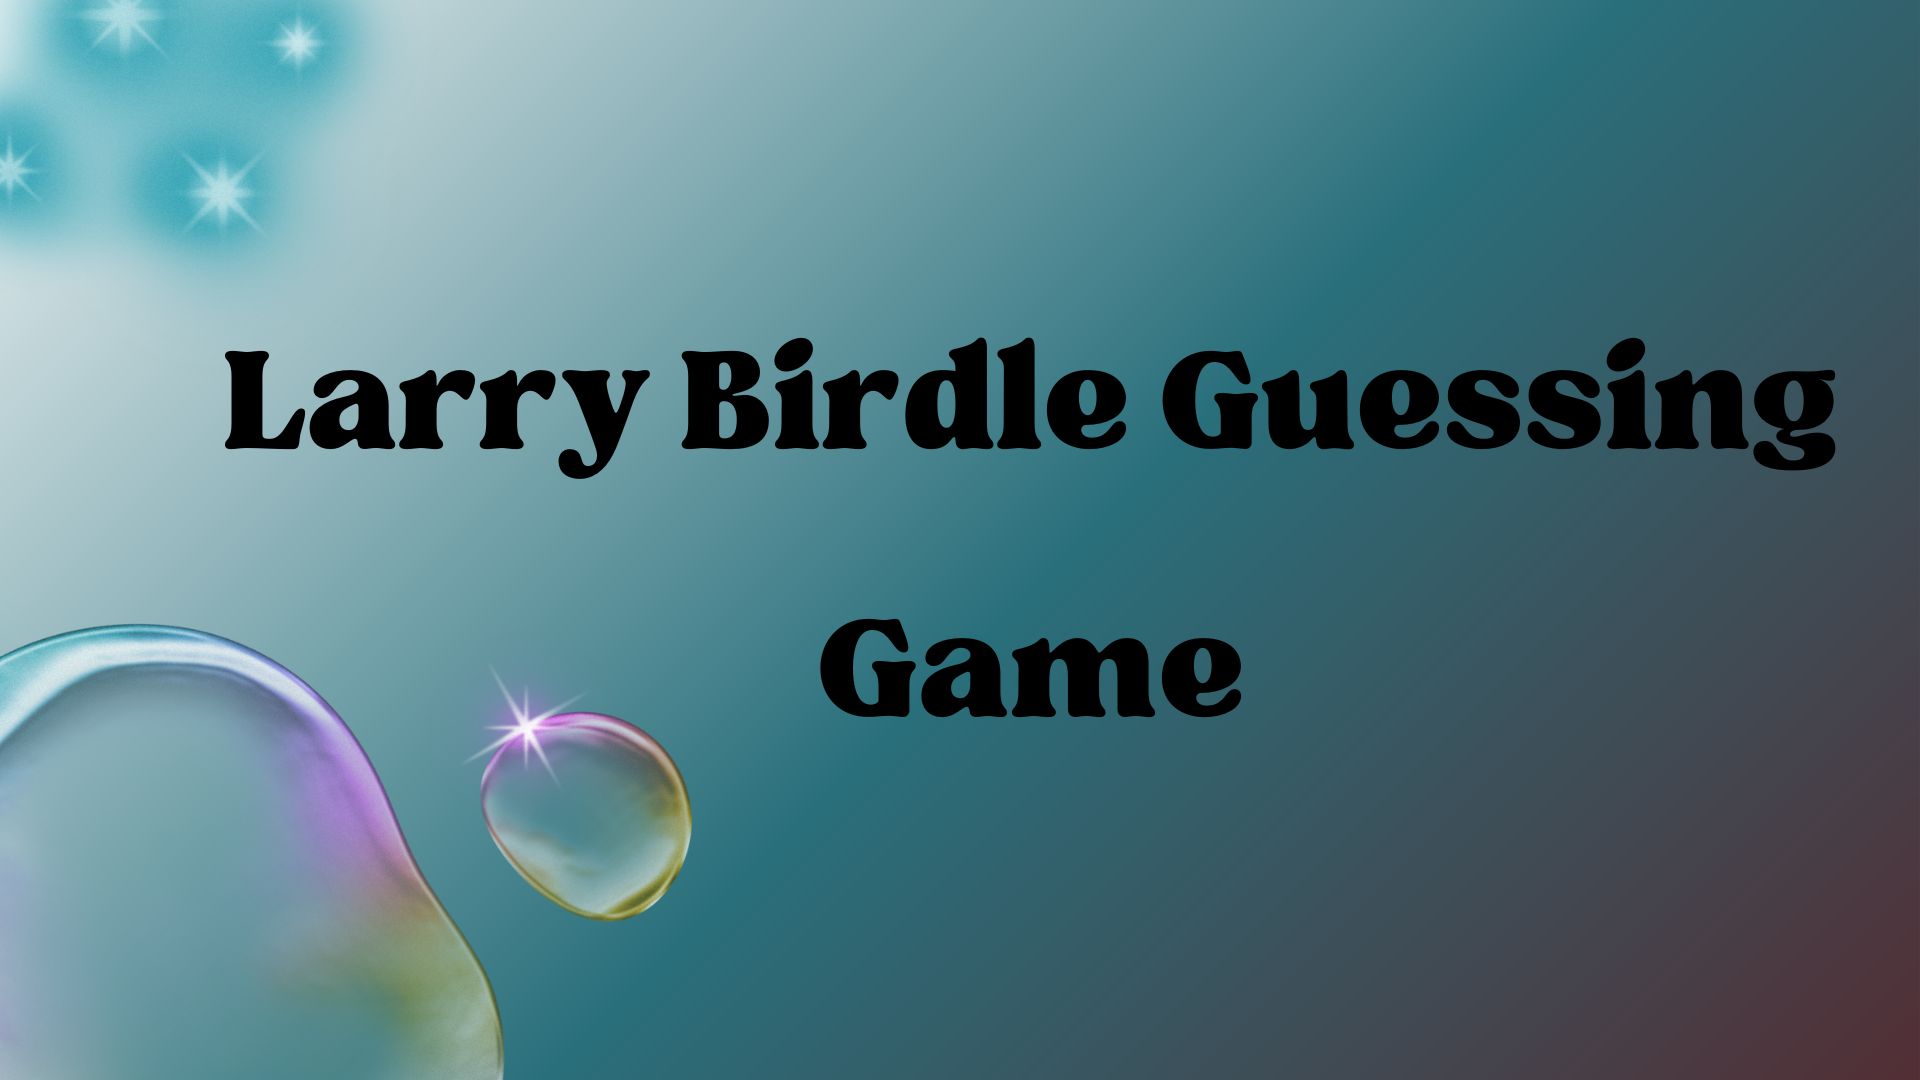 Larry Birdle Guessing Game